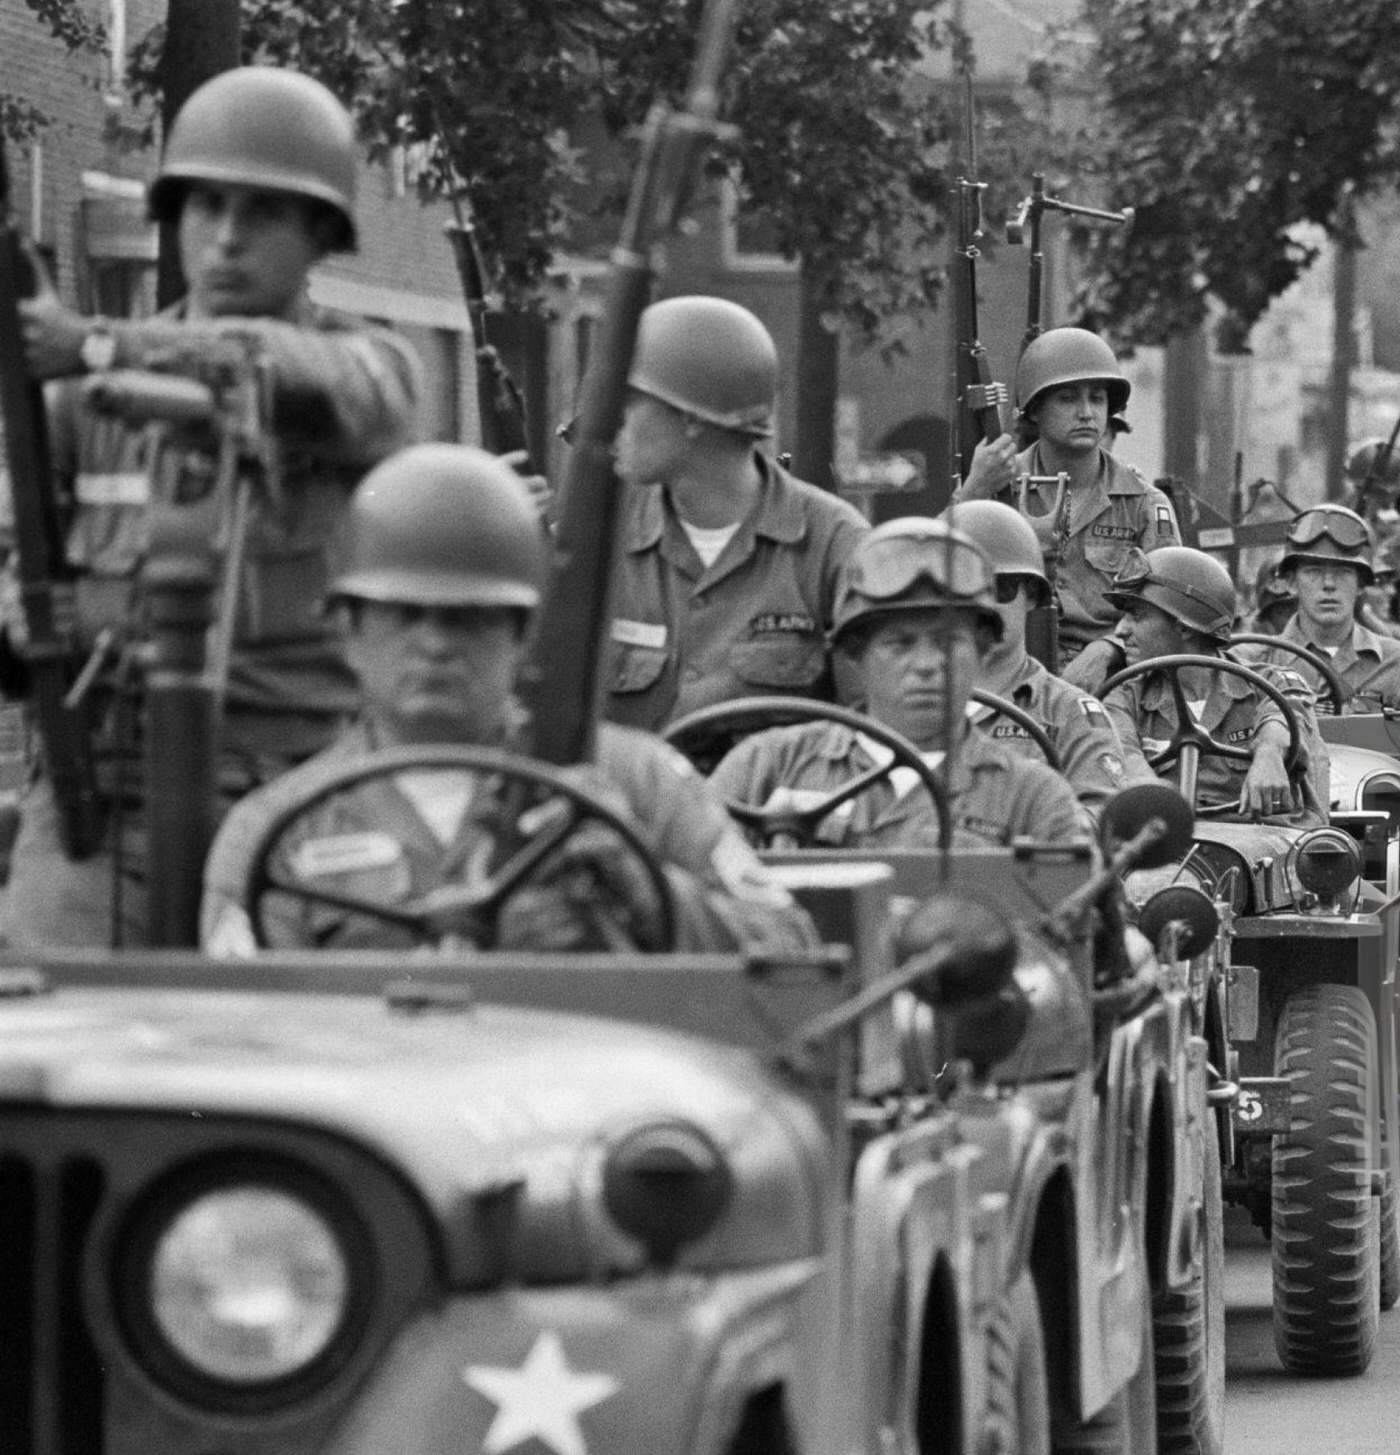 A regiment of the federal guard and state police driving jeeps in single file on an avenue